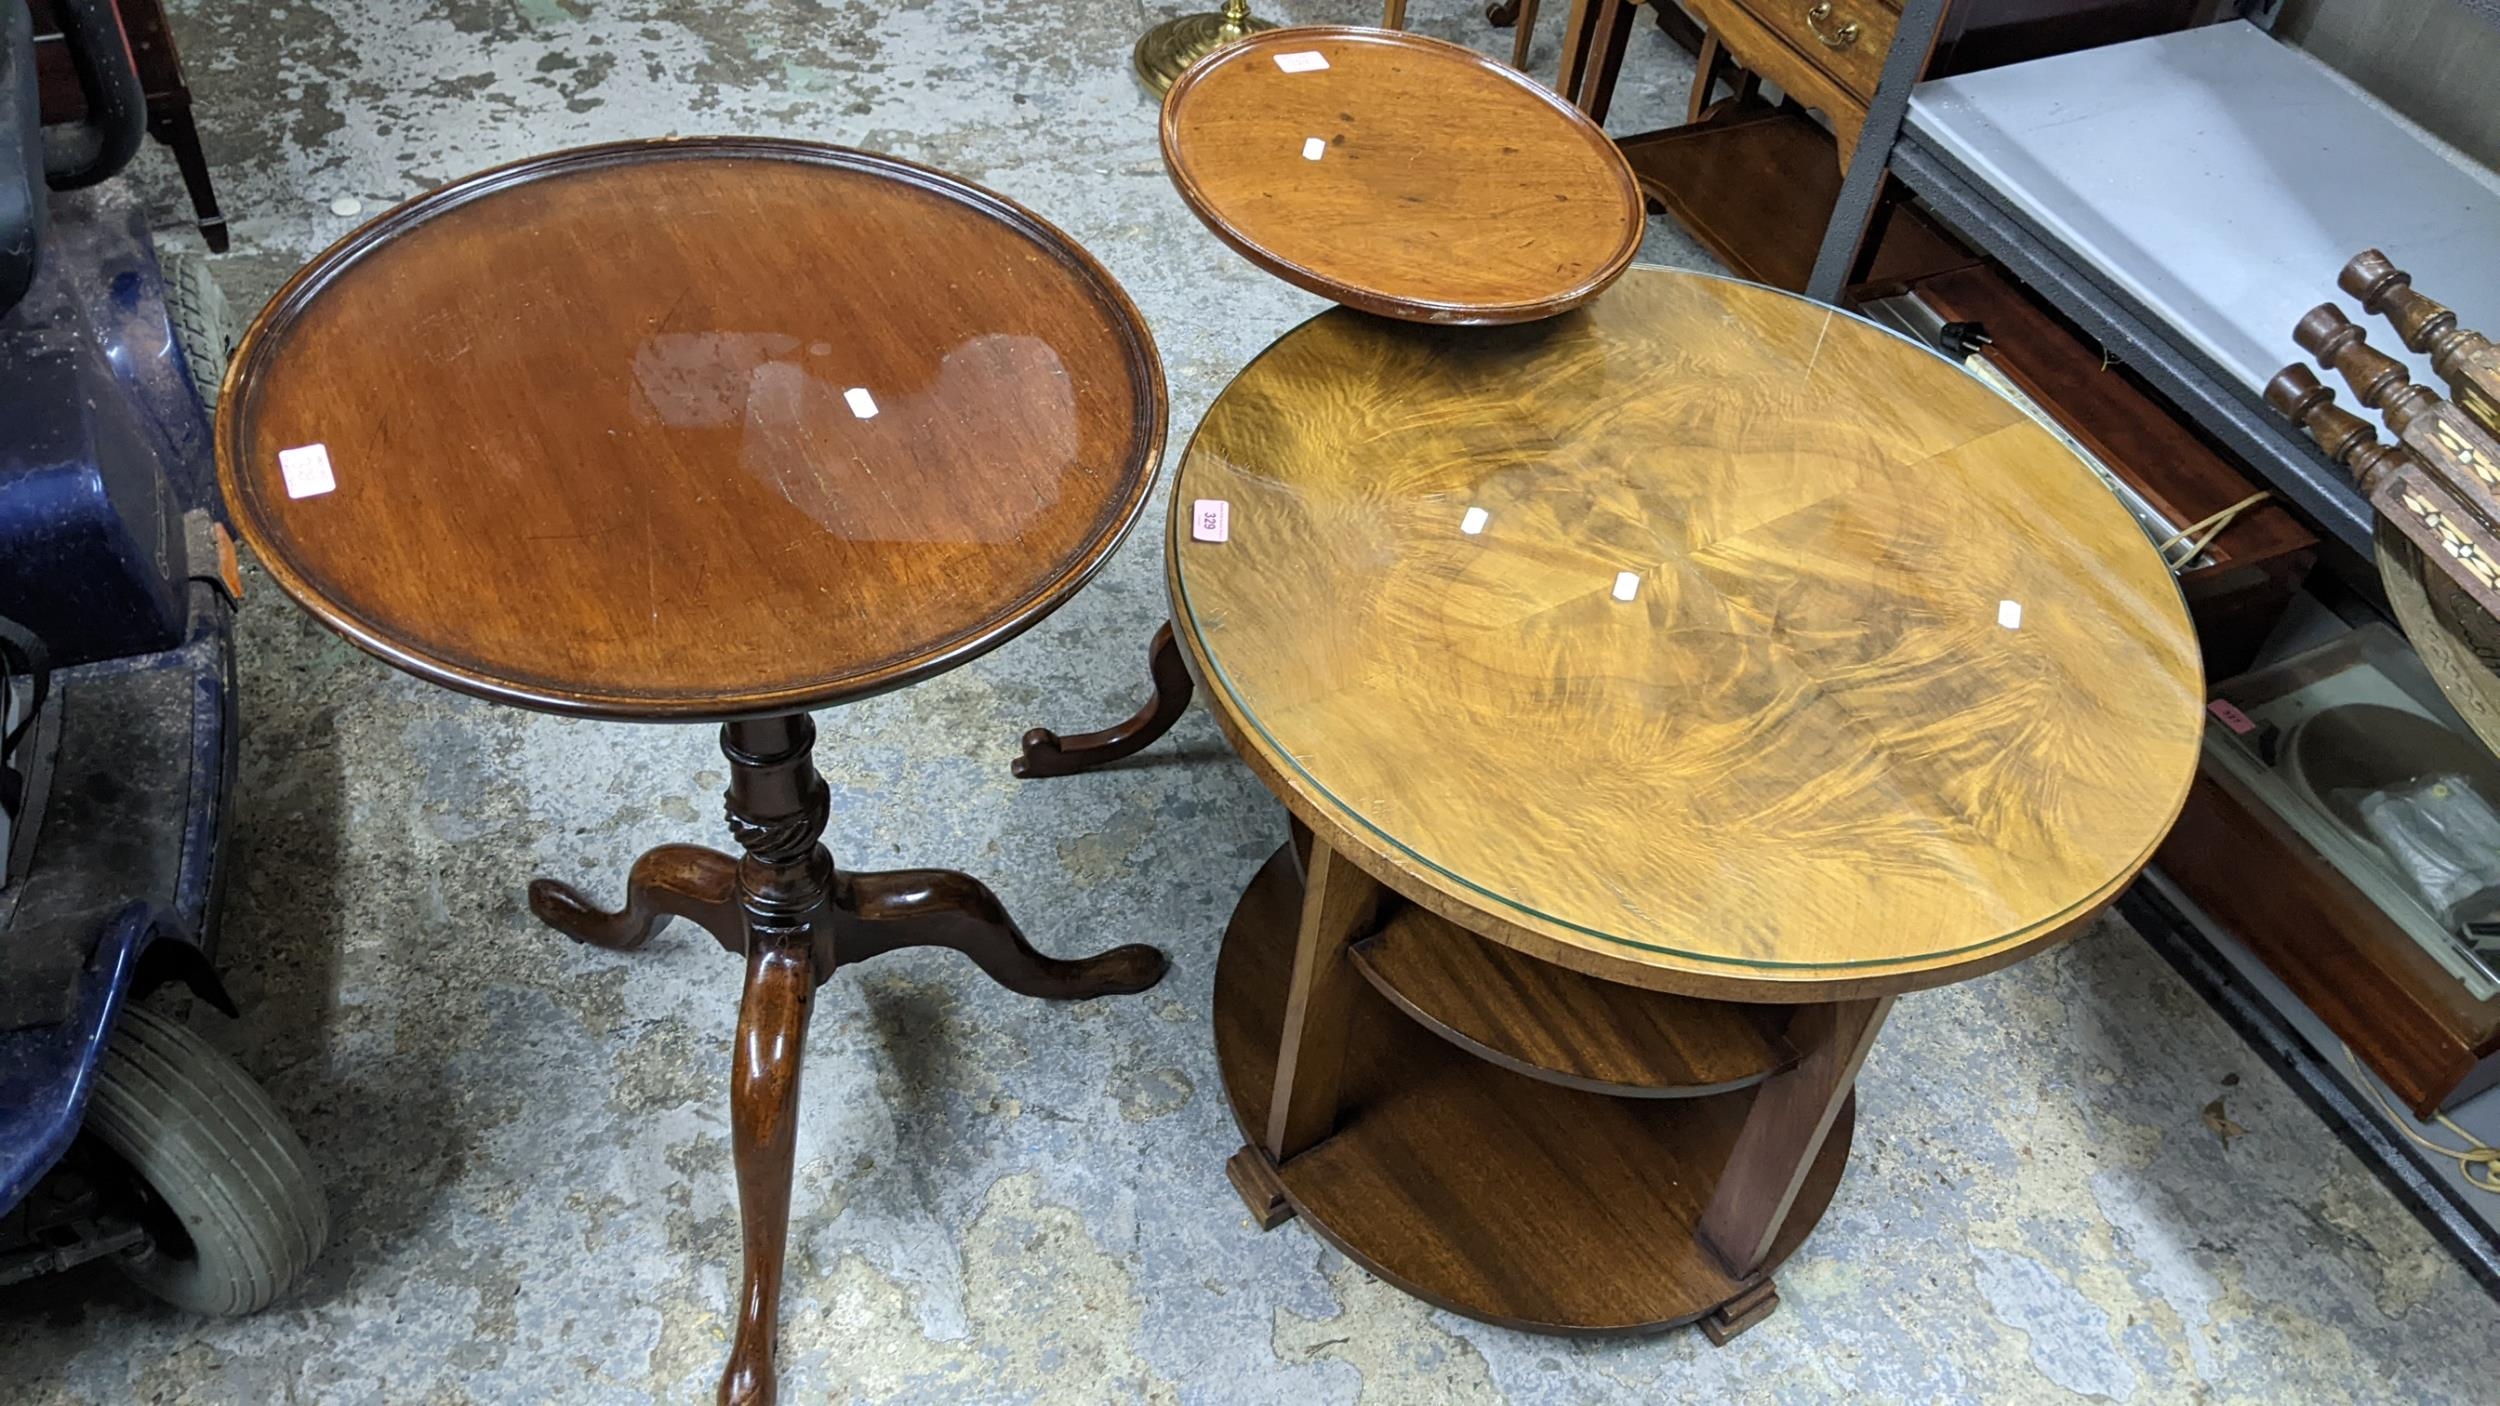 An Art Deco period walnut three tier circular table with quarter cut and glass top, supported on